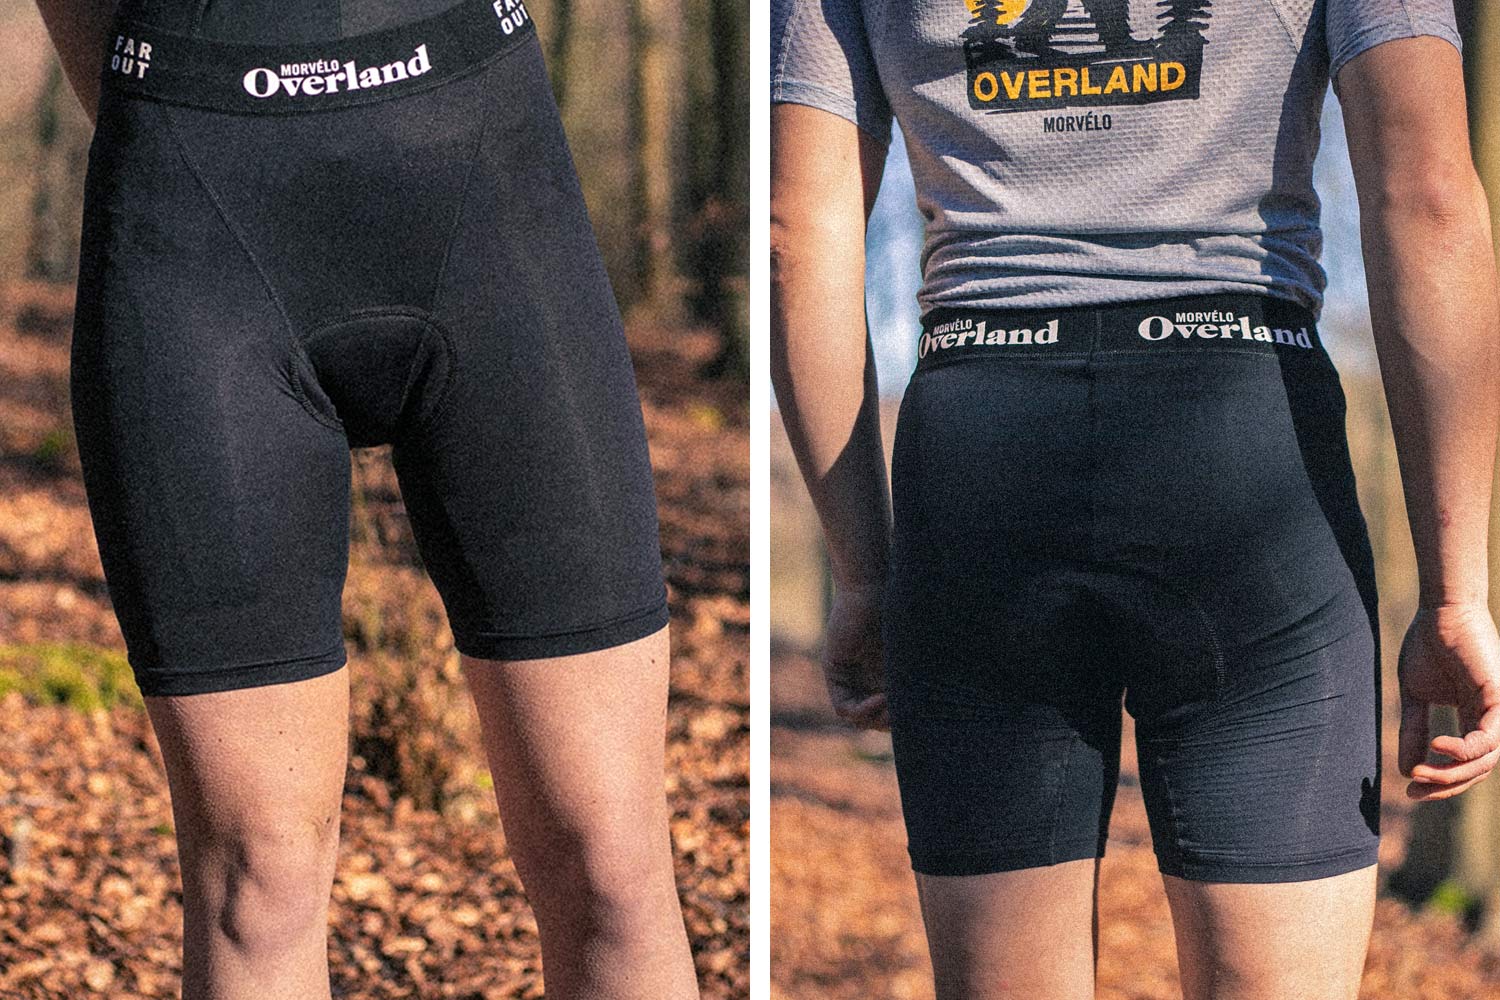 Morvelo Morvélo Overland all-road gravel cycling kit on-road & off-road casual performance cycling clothing